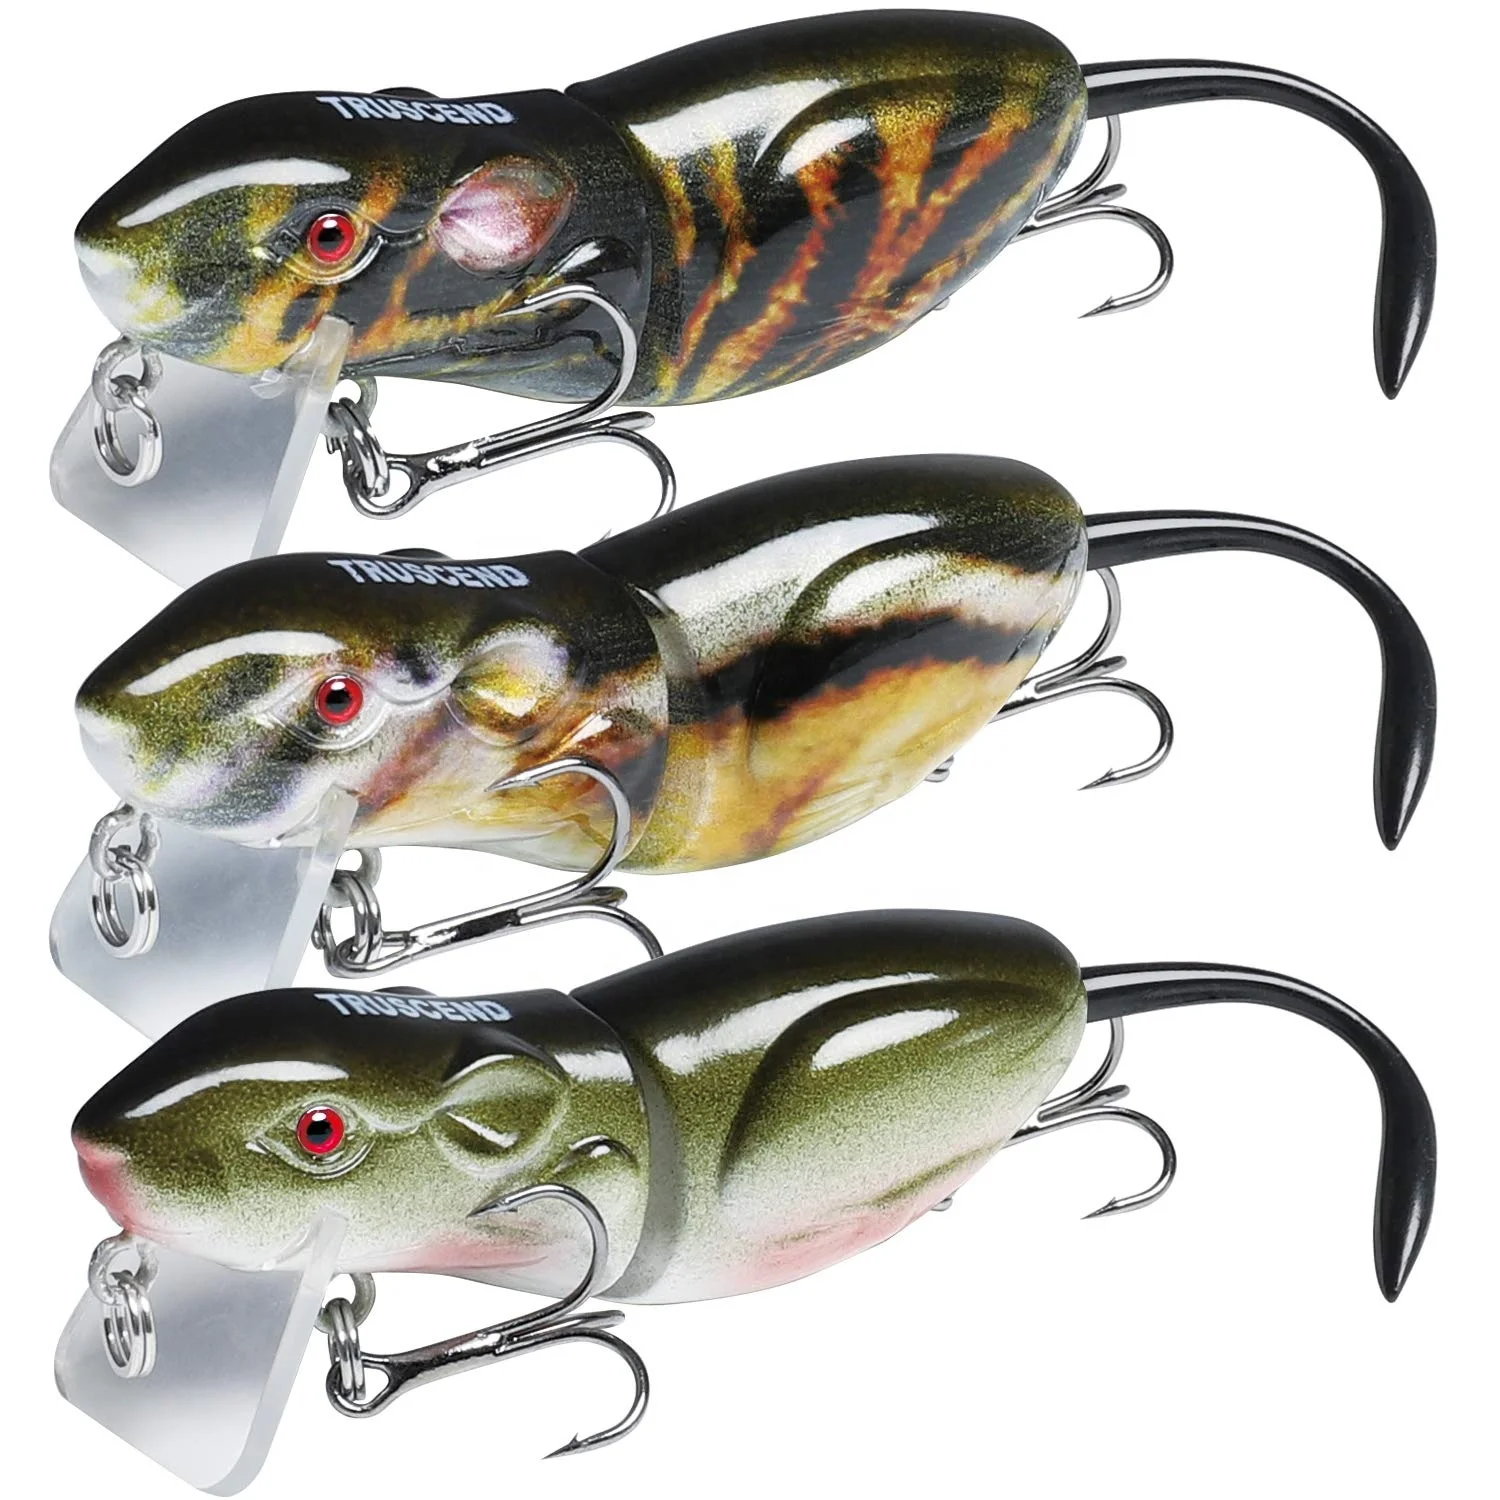 

TRUSCEND Amazon Best Seller Freshwater Fishing Lures Small Rat TopWater Baits For Bass Fishing Topwater Baits, G-2.4-0.35oz